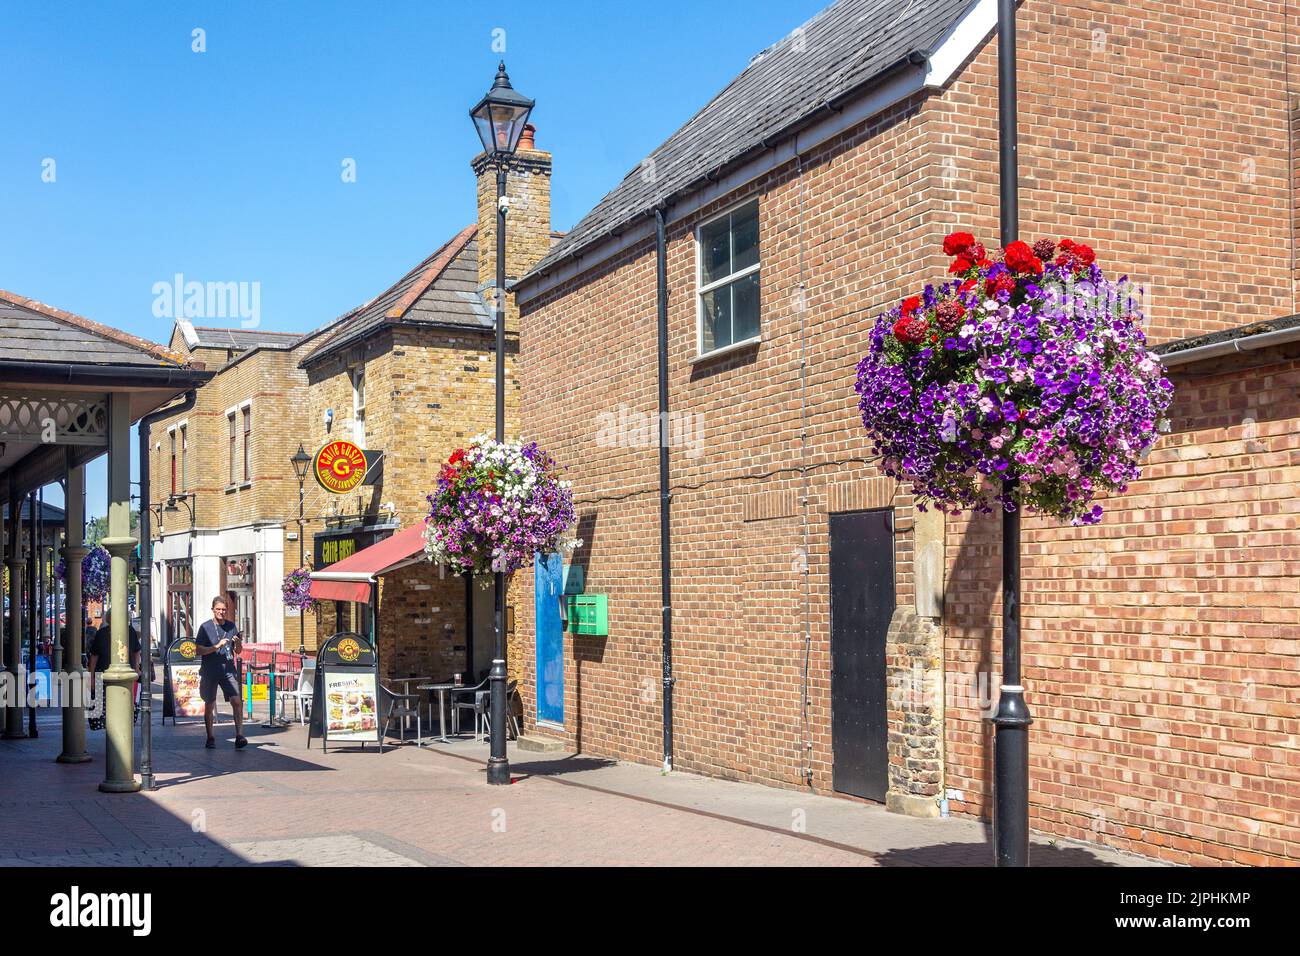 Tilly Lane, Staines-upon-Thames, Surrey, Angleterre, Royaume-Uni Banque D'Images